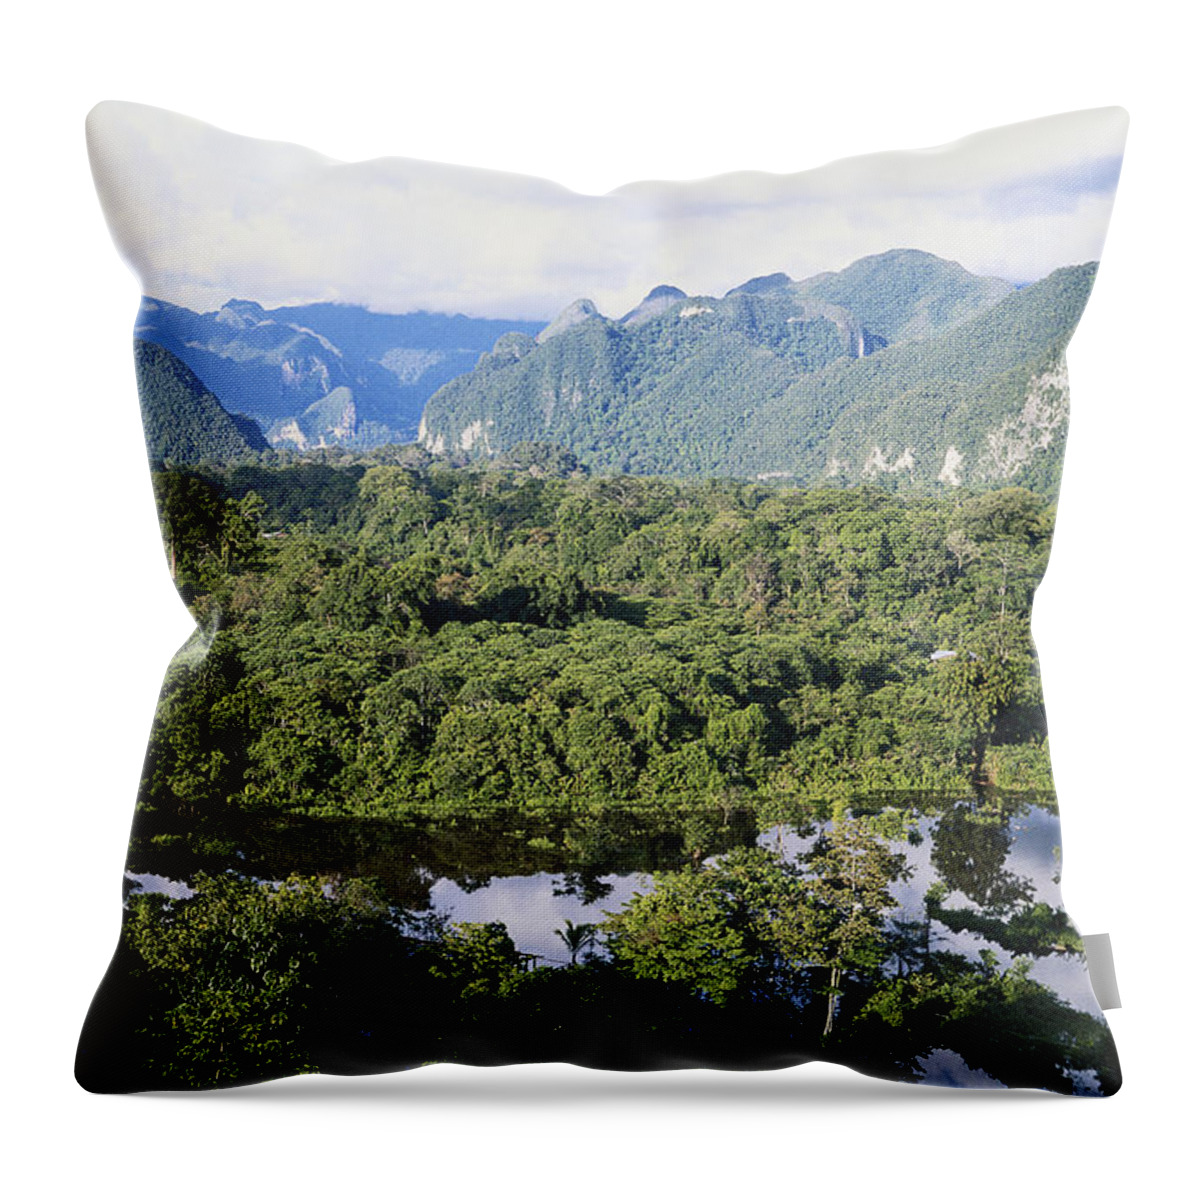 Asian Forest Throw Pillow featuring the photograph Rainforest In Sarawak, Borneo by Simon D. Pollard